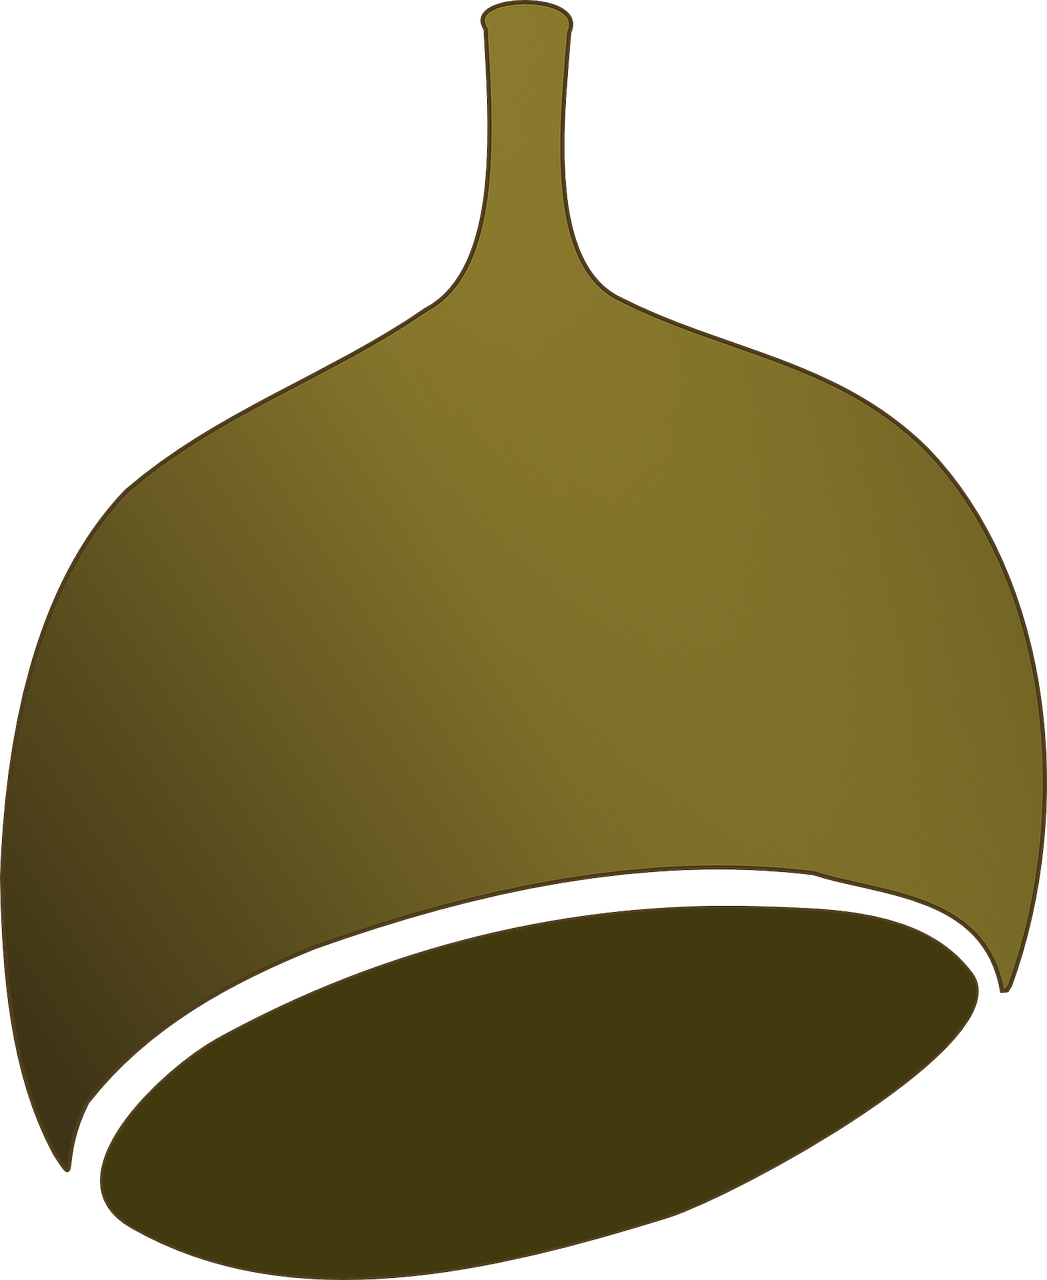 a brown acorn on a white background, a digital rendering, inspired by Shūbun Tenshō, hurufiyya, olive green, lacquerware, pointy hat, vectorized